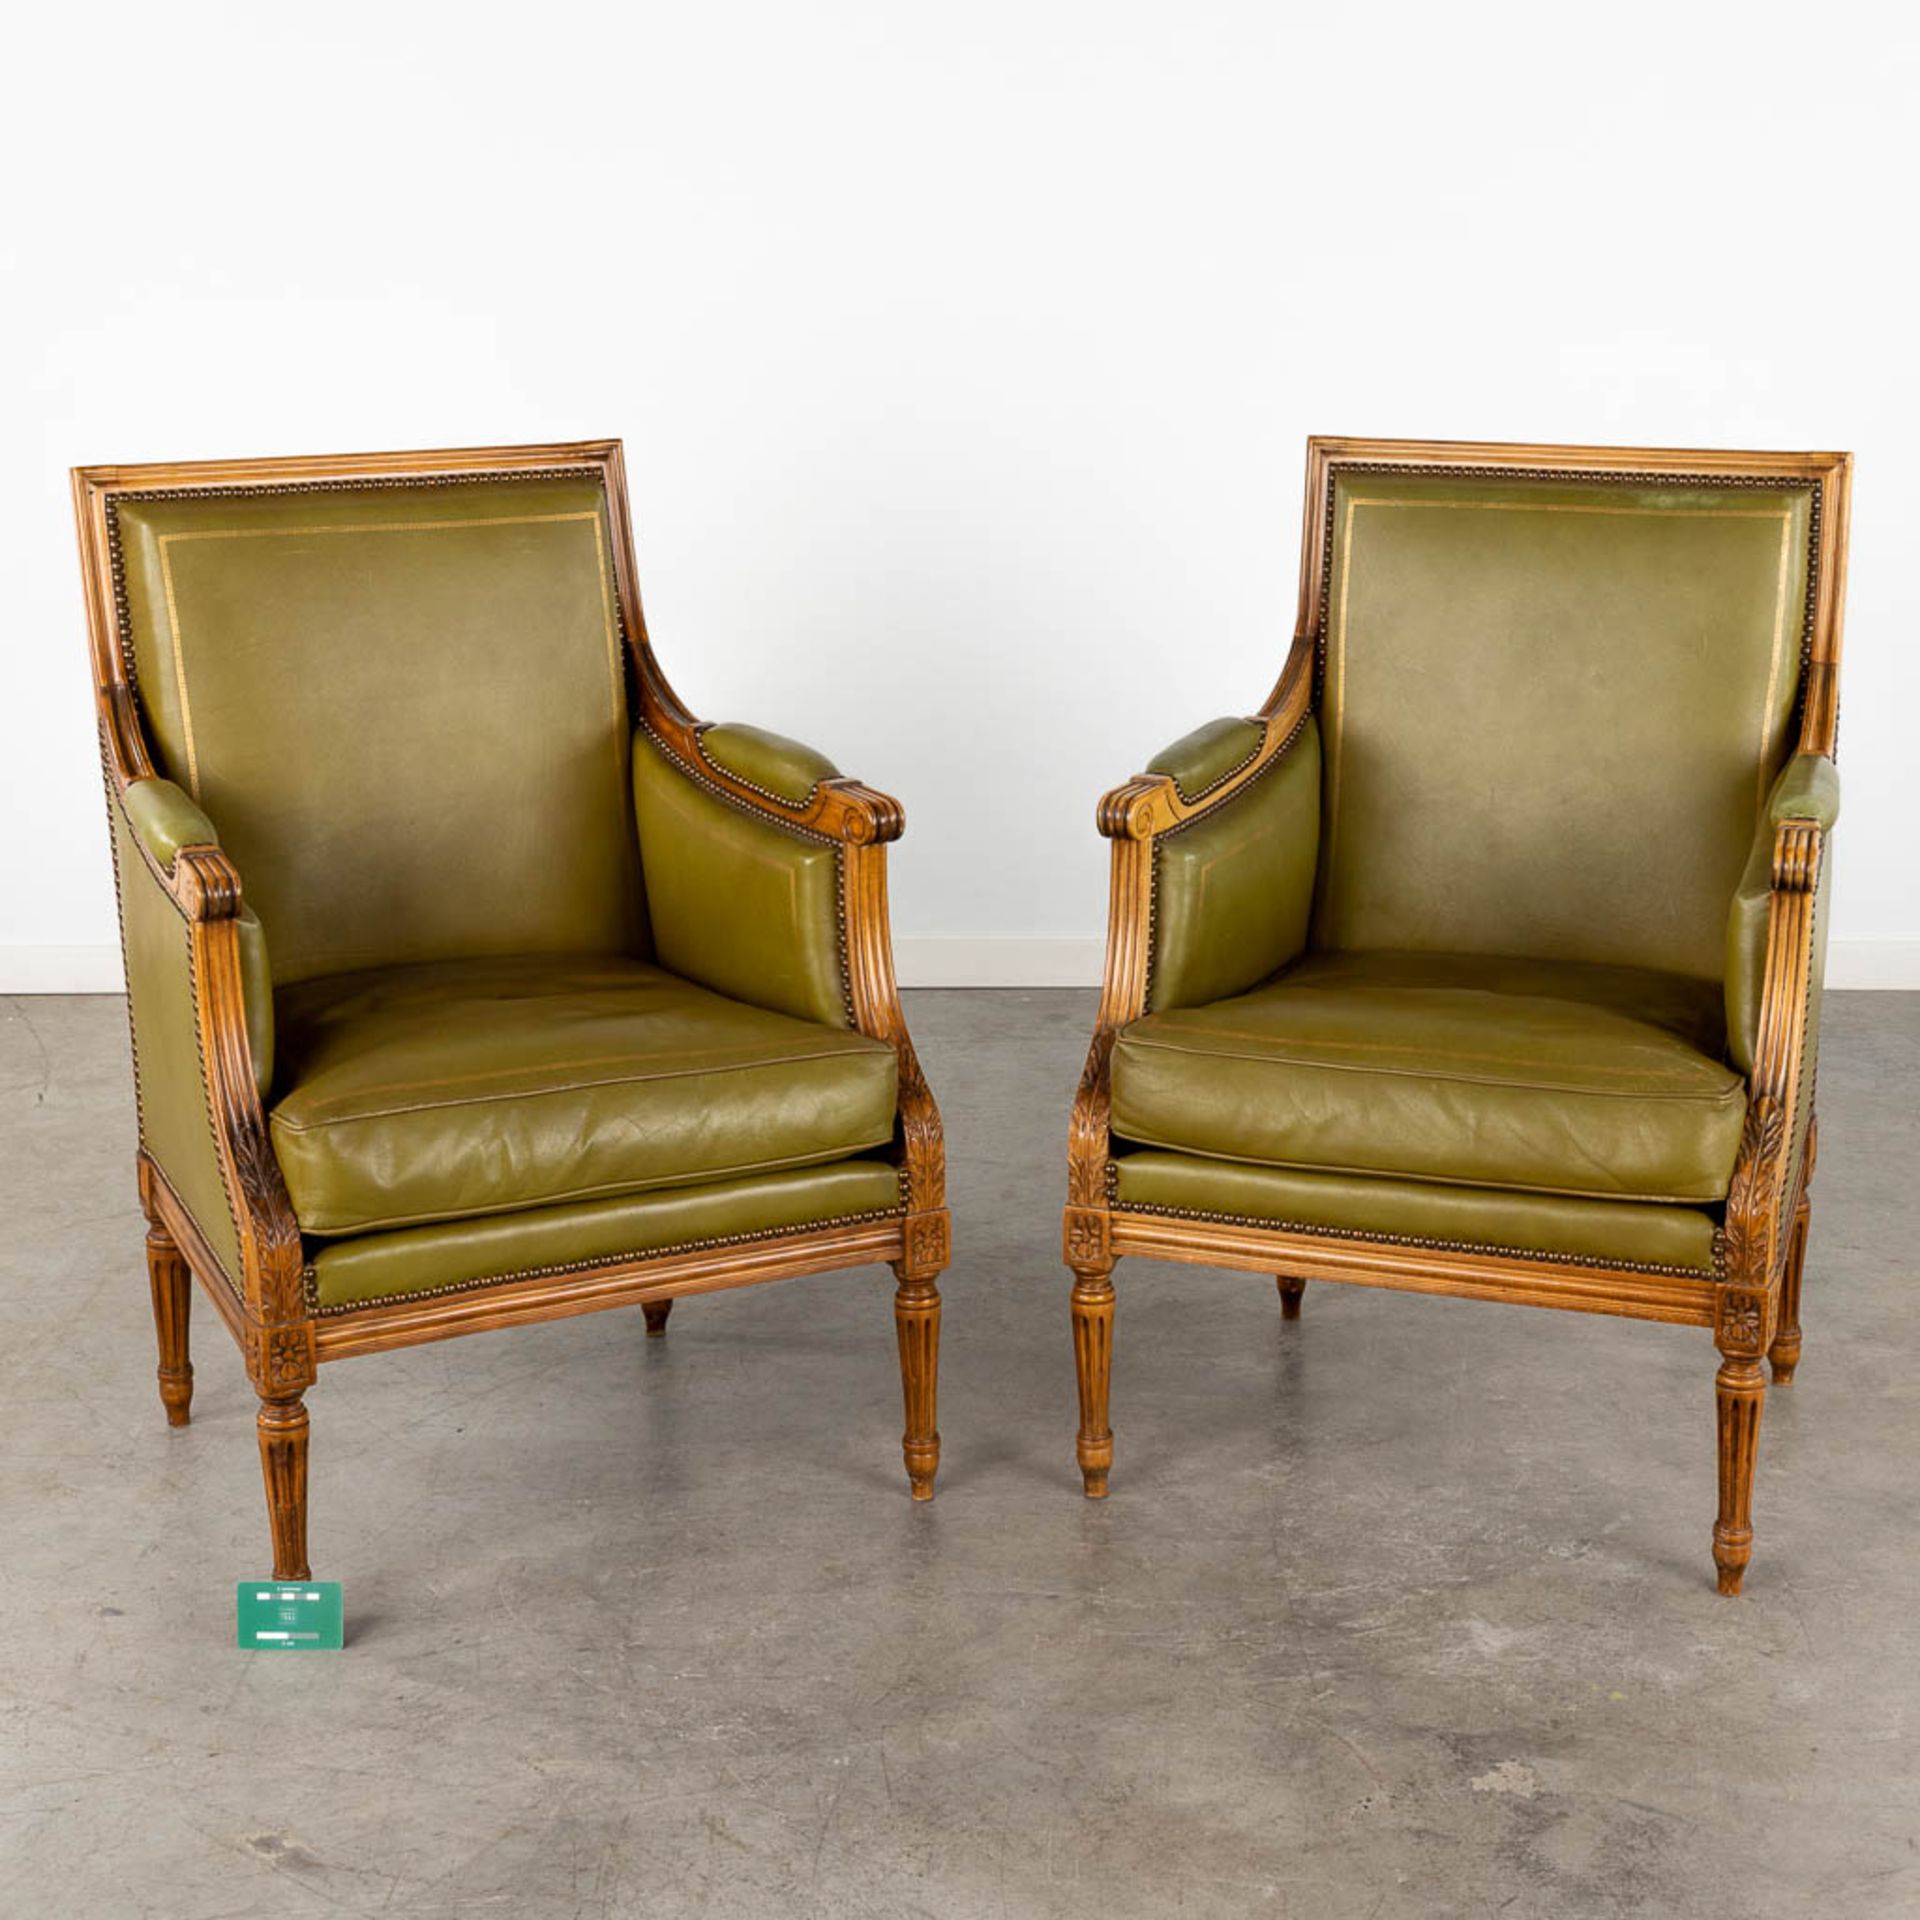 A pair of Louis XVI style armchairs, wood and olive green leather. Circa 1970. (D:61 x W:60 x H:90 c - Image 2 of 11